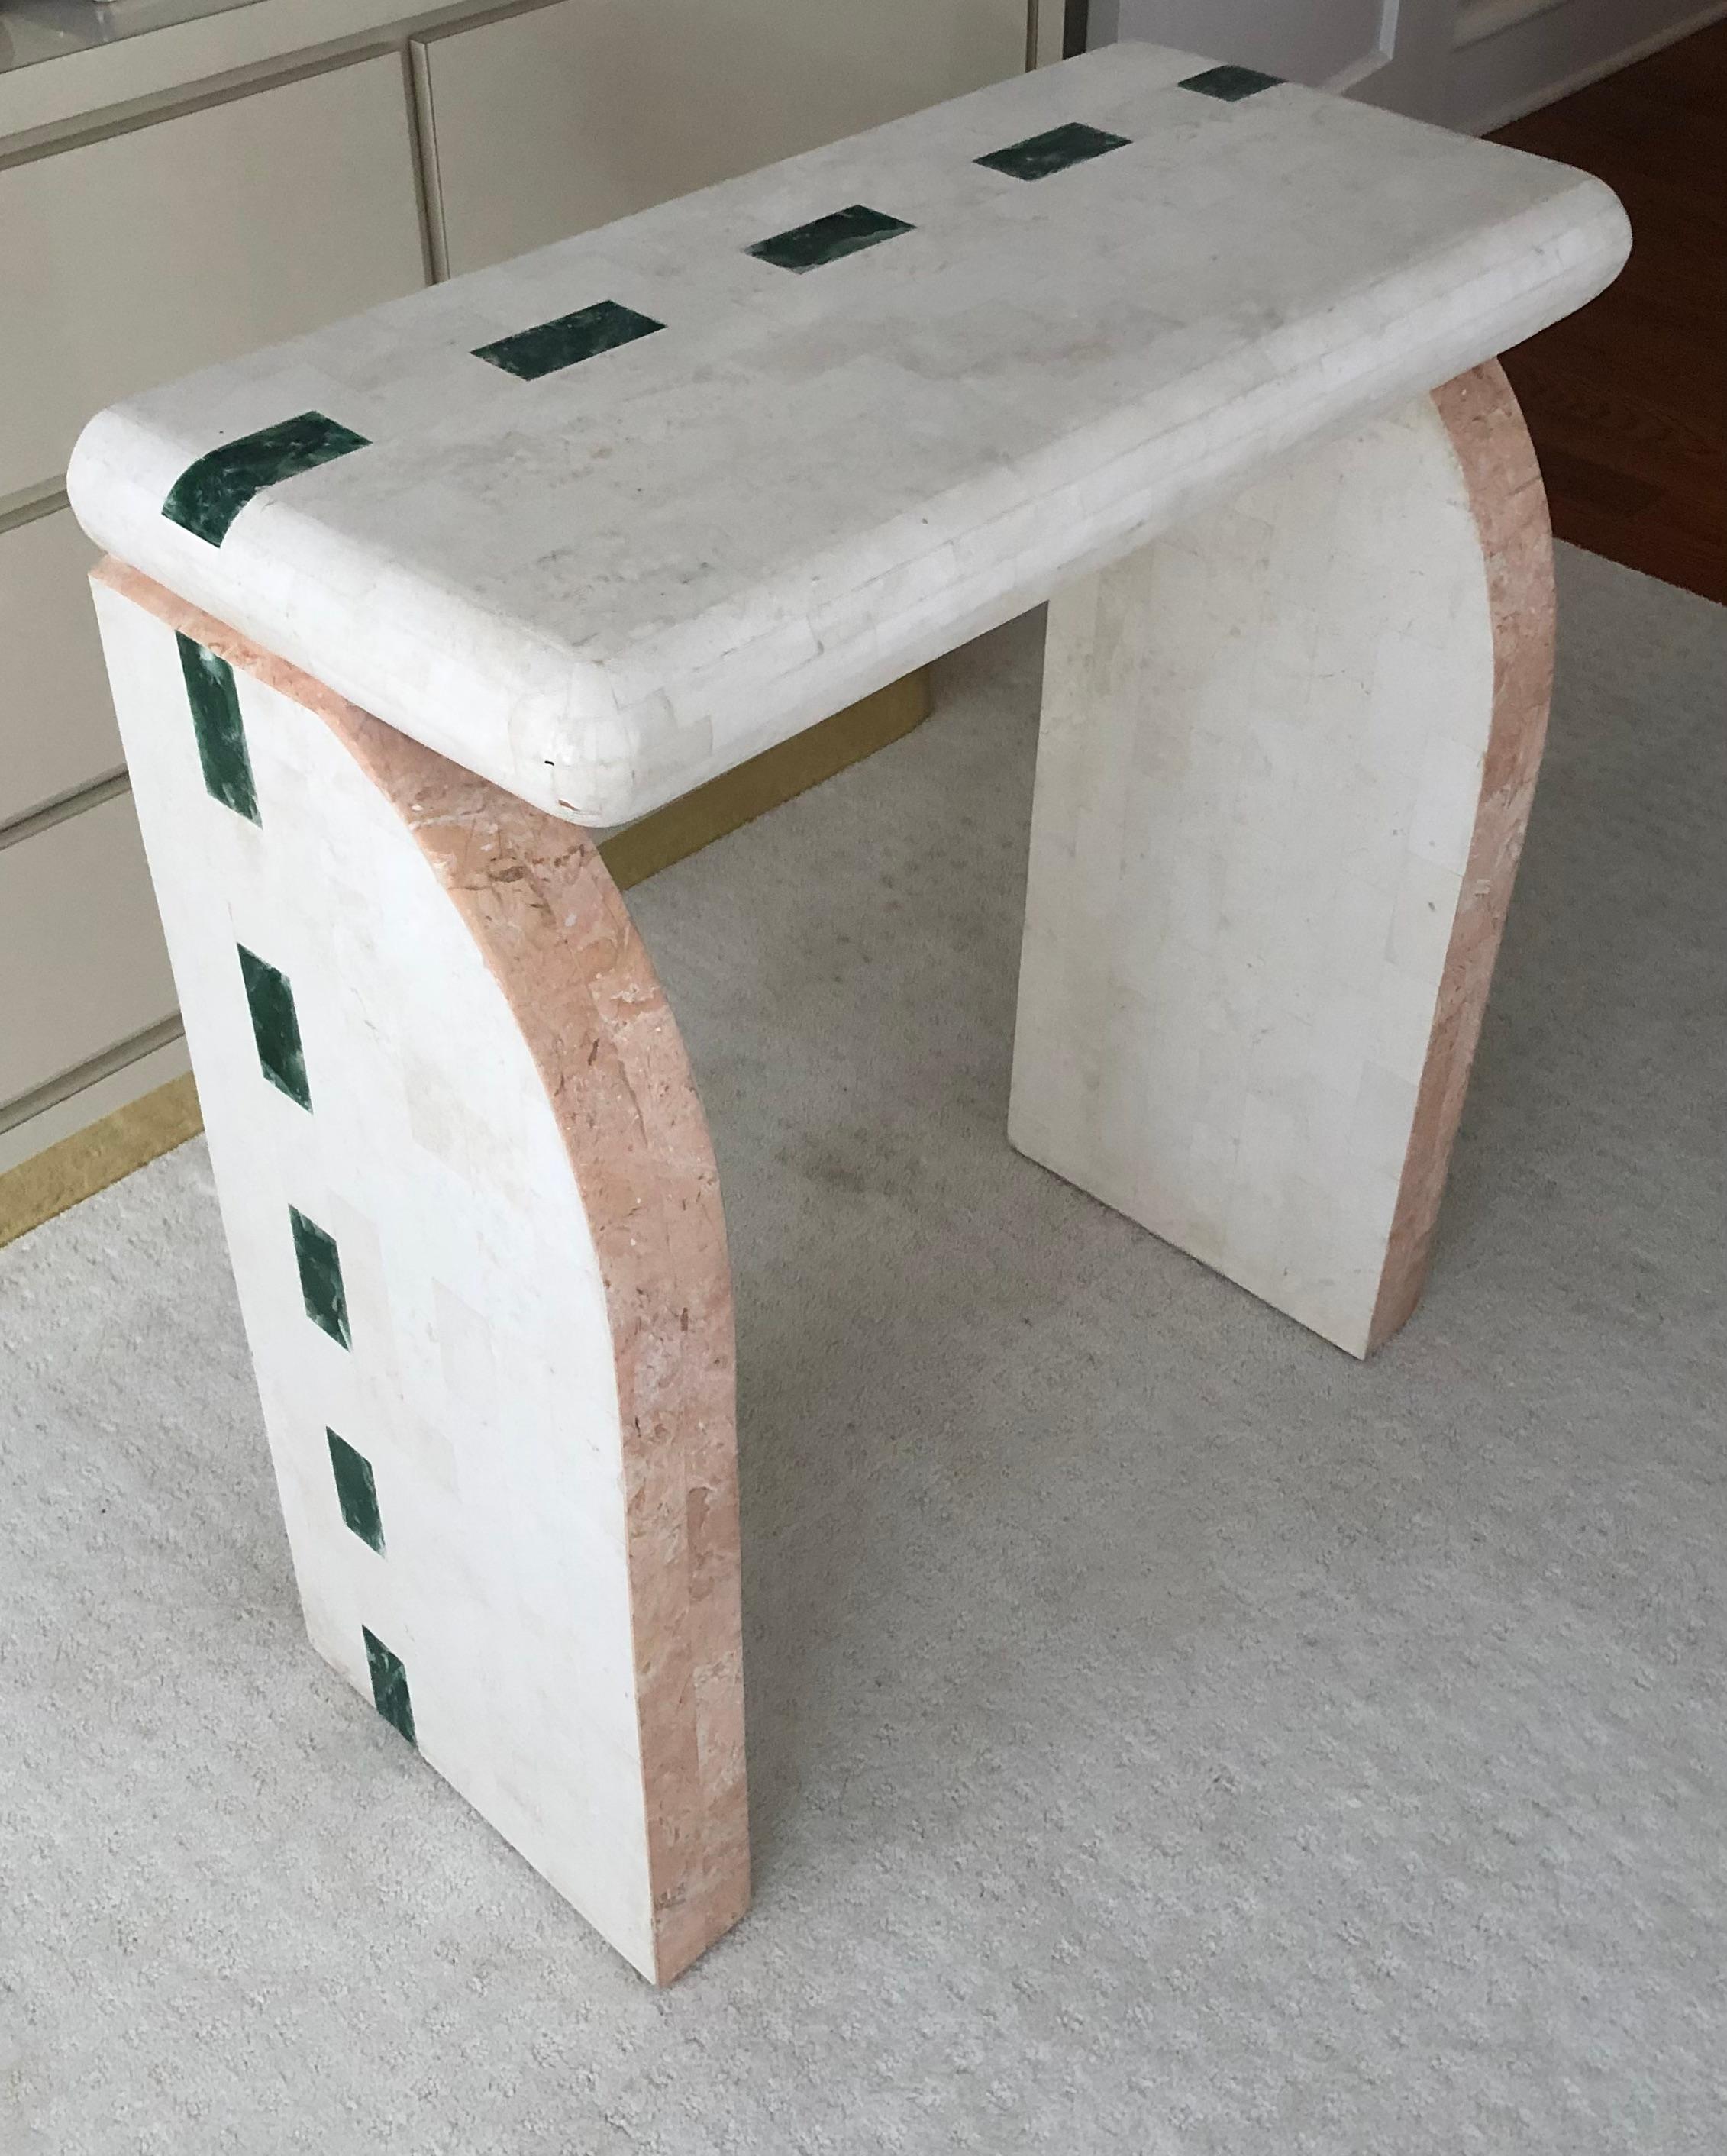 This is an interesting console table, with both Art Deco and Modernist lines. 

There is a tri-colore theme; Having a pink and cream tessellated fossil facade, and a repeating emerald-green inlaid geometric pattern . 
   
While no tags remain, I